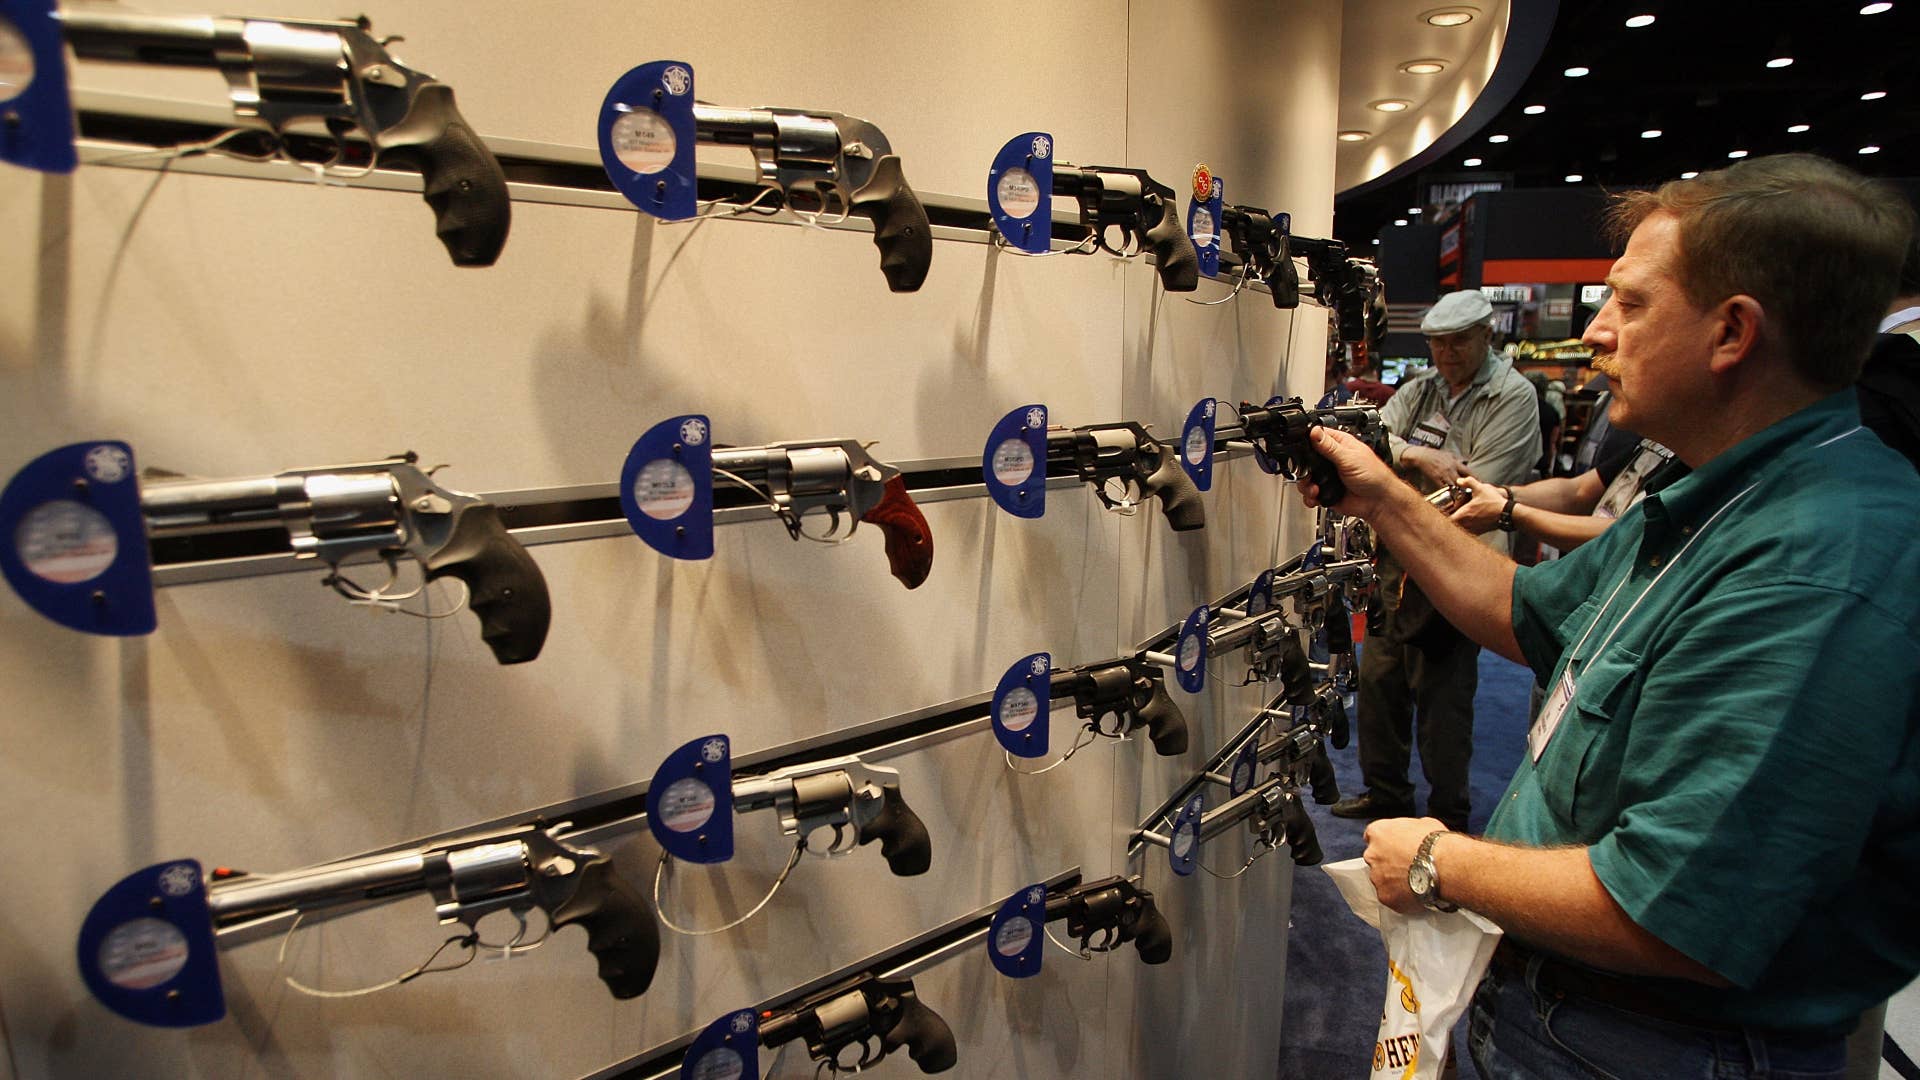 Tim Basington looks over Smith & Wesson pistols at the NRA annual meeting.